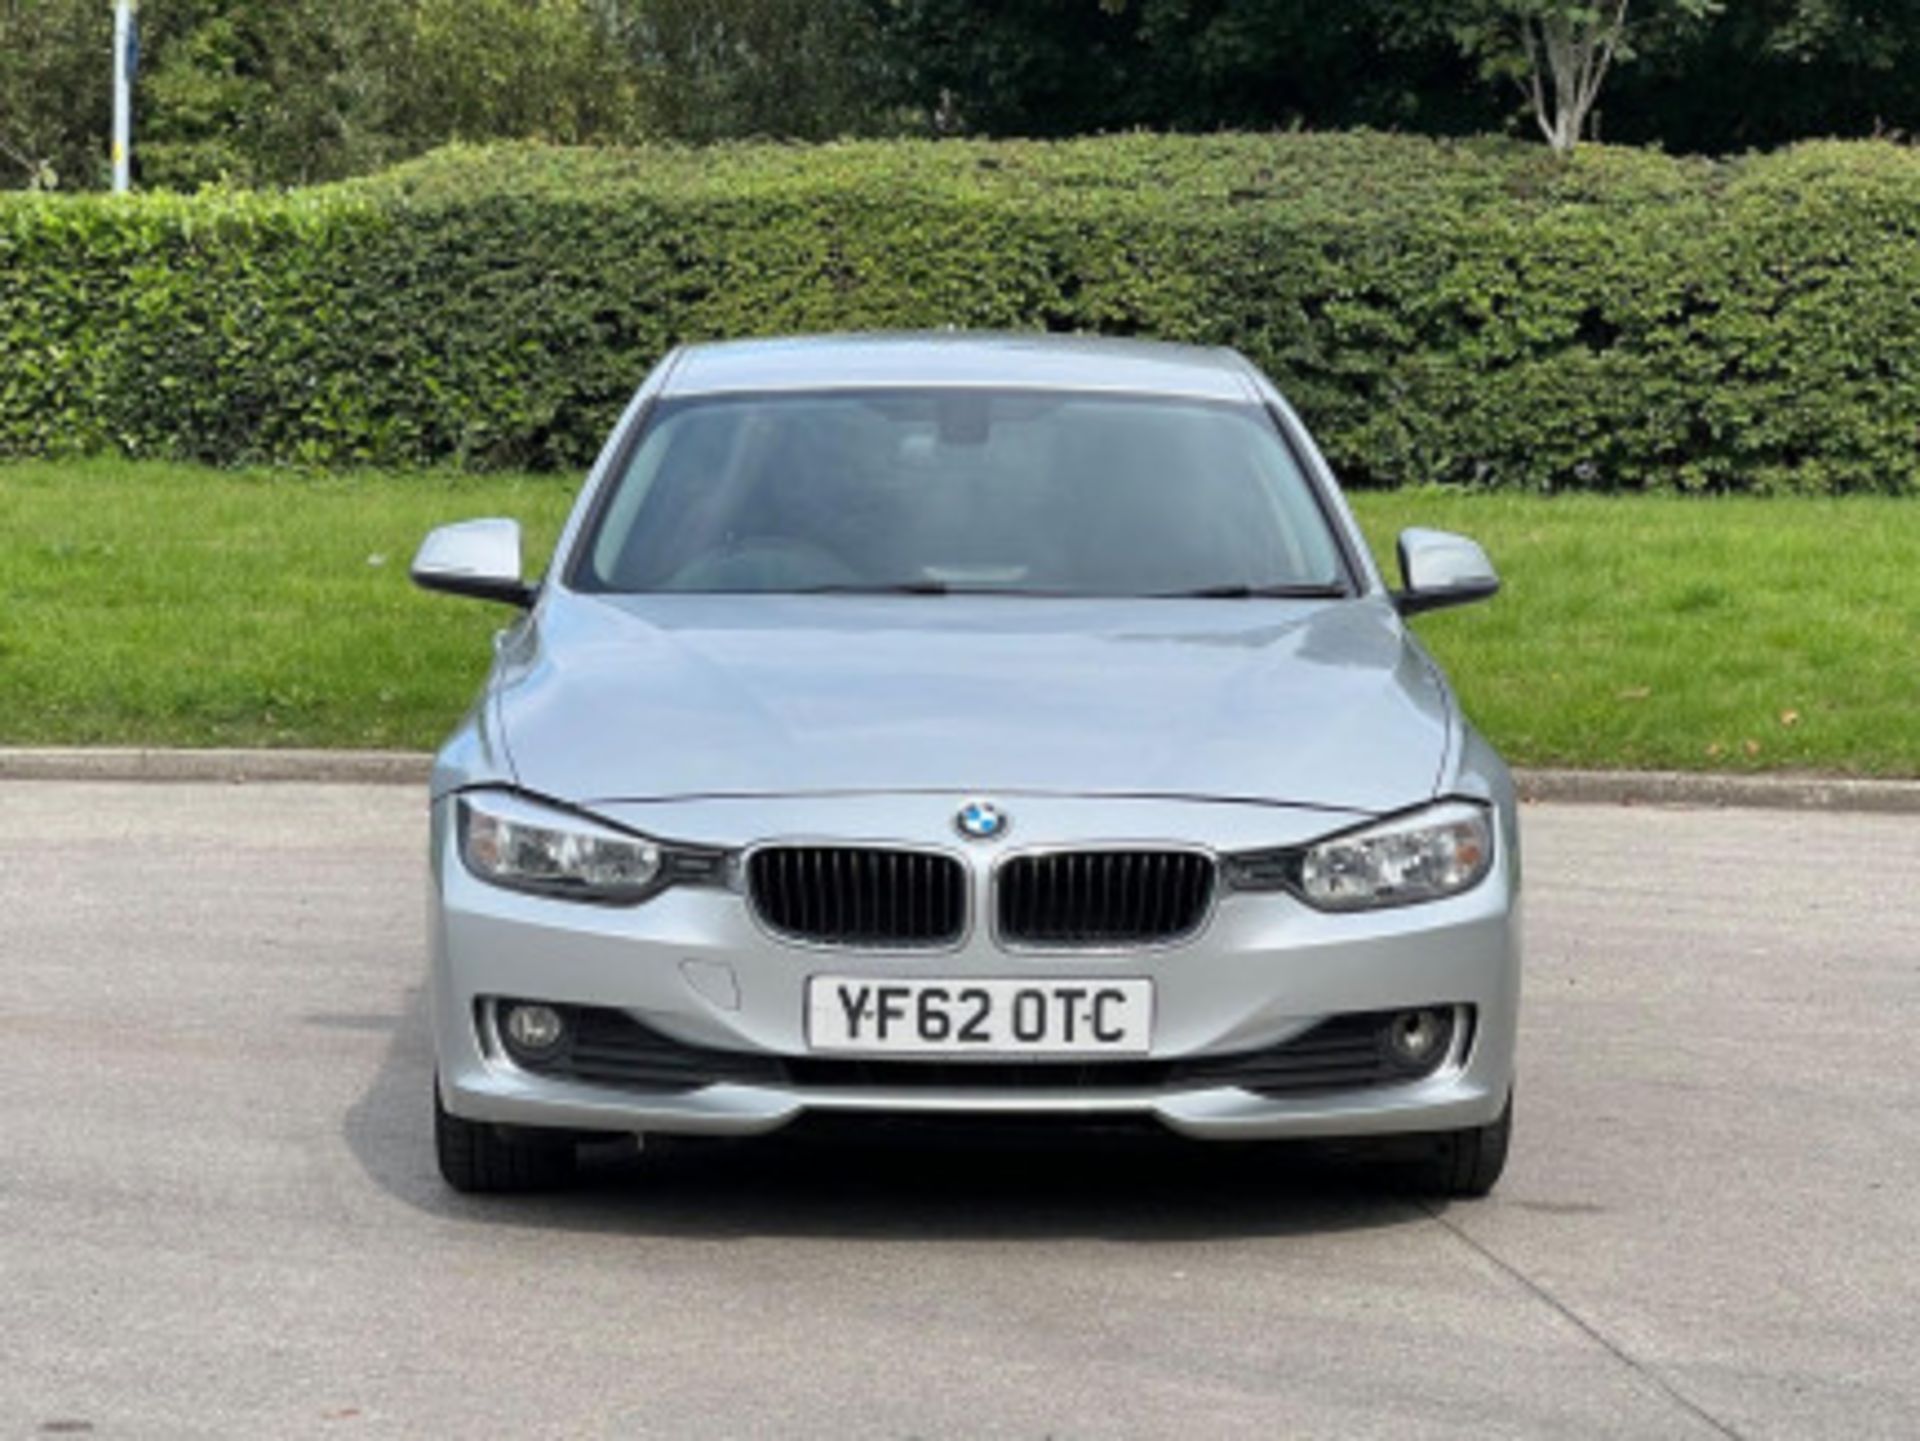 BMW 3 SERIES 2.0 DIESEL ED START STOP - A WELL-MAINTAINED GEM >>--NO VAT ON HAMMER--<< - Image 134 of 229